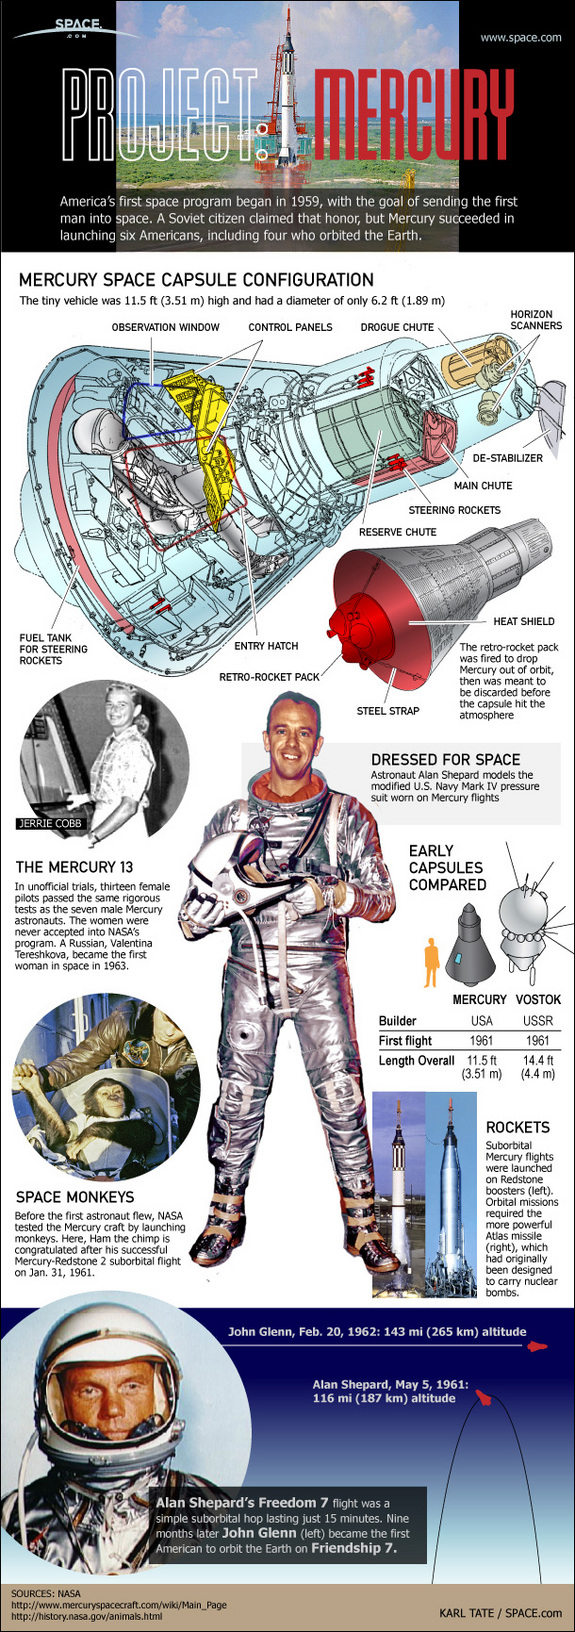 See how the first American astronauts flew in space on NASA's Mercury space capsules in this SPACE.com infographic.